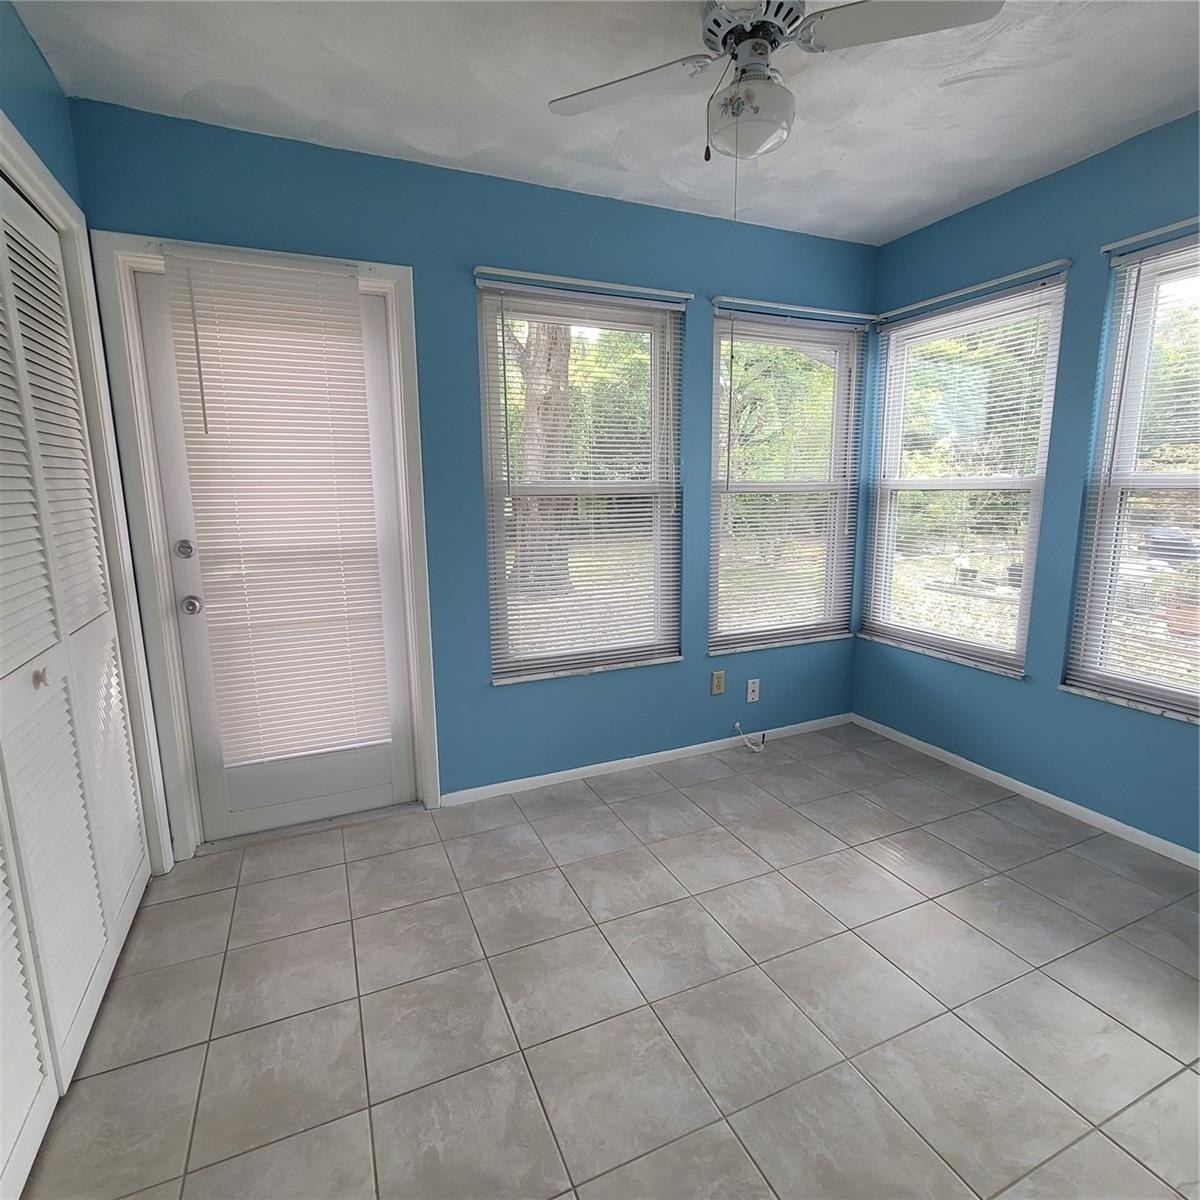 Large enclosed back porch with tile floor